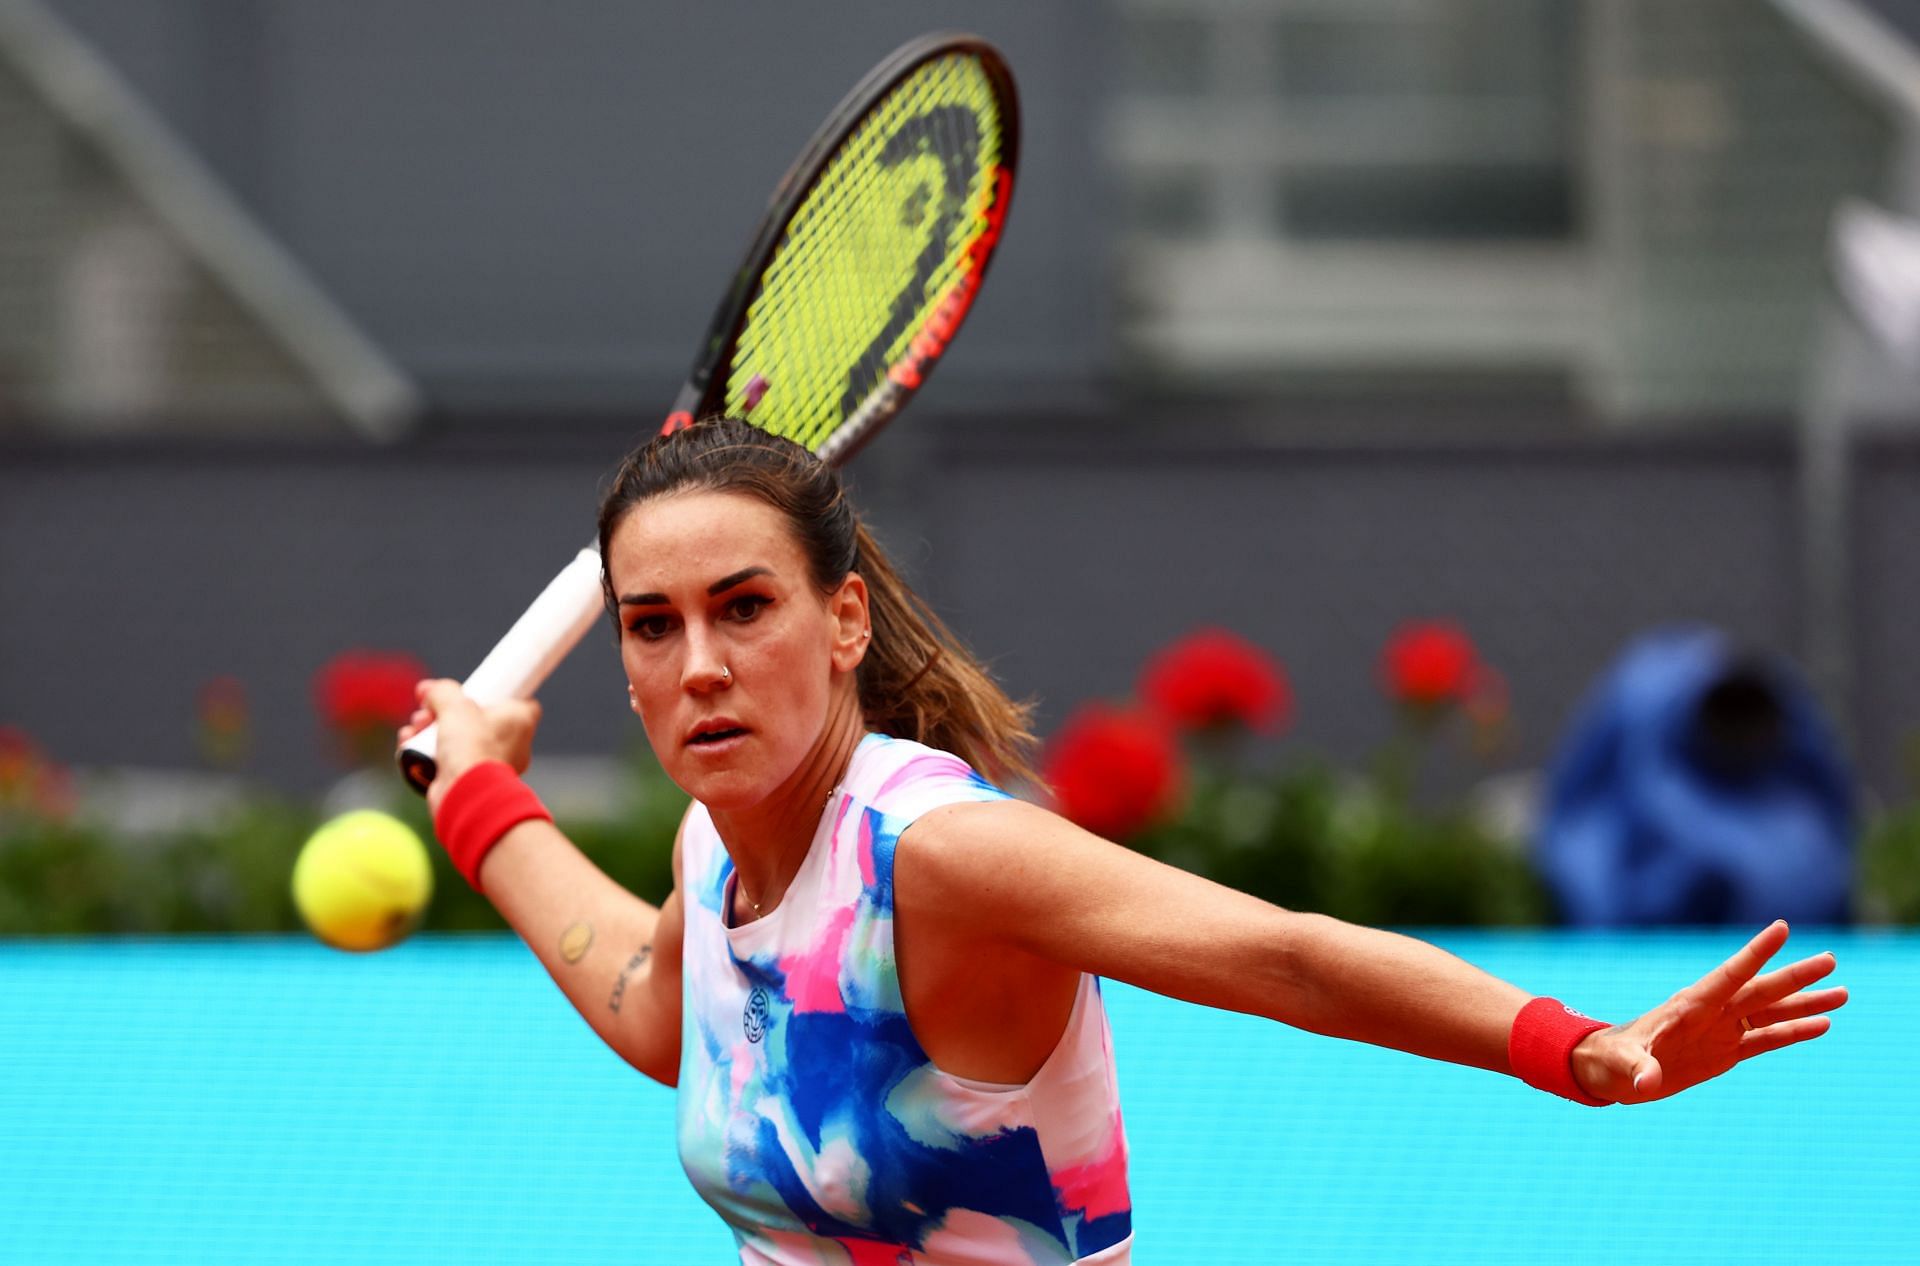 Parrizas-Diaz in action at the Madrid Open